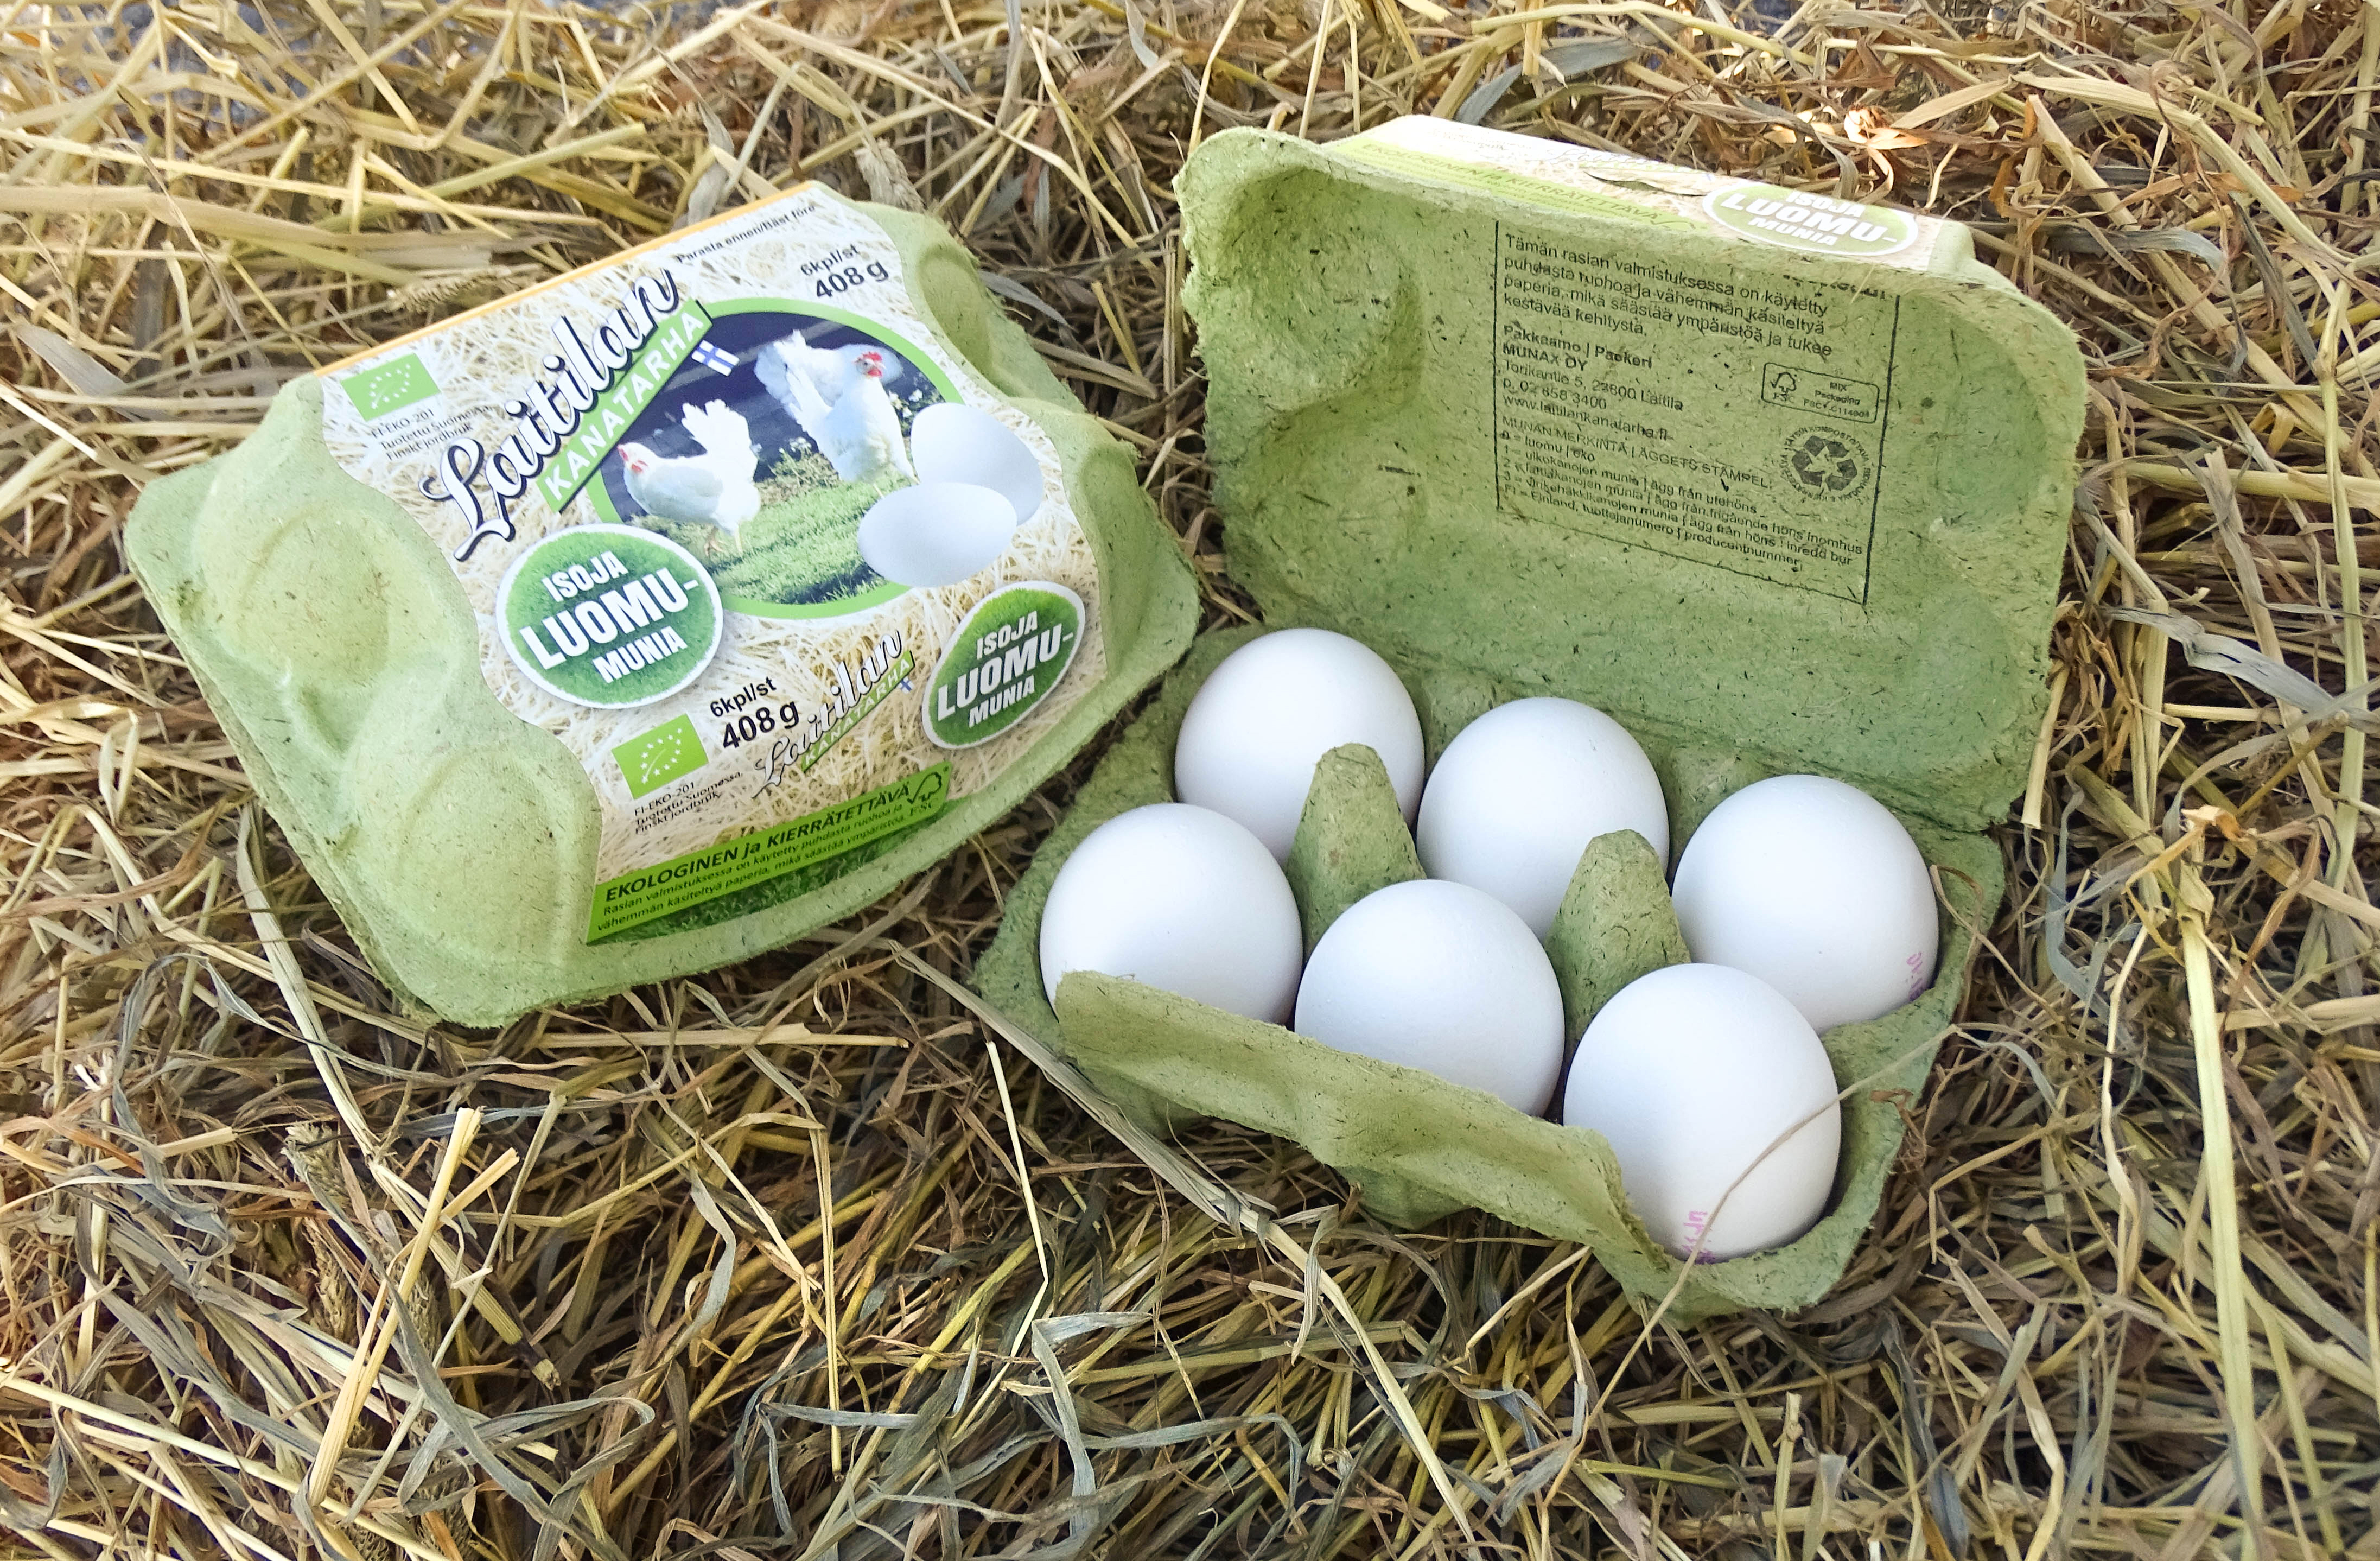 GreeNest - innovative egg packaging made with grass fibers. Photo: Munax Oy